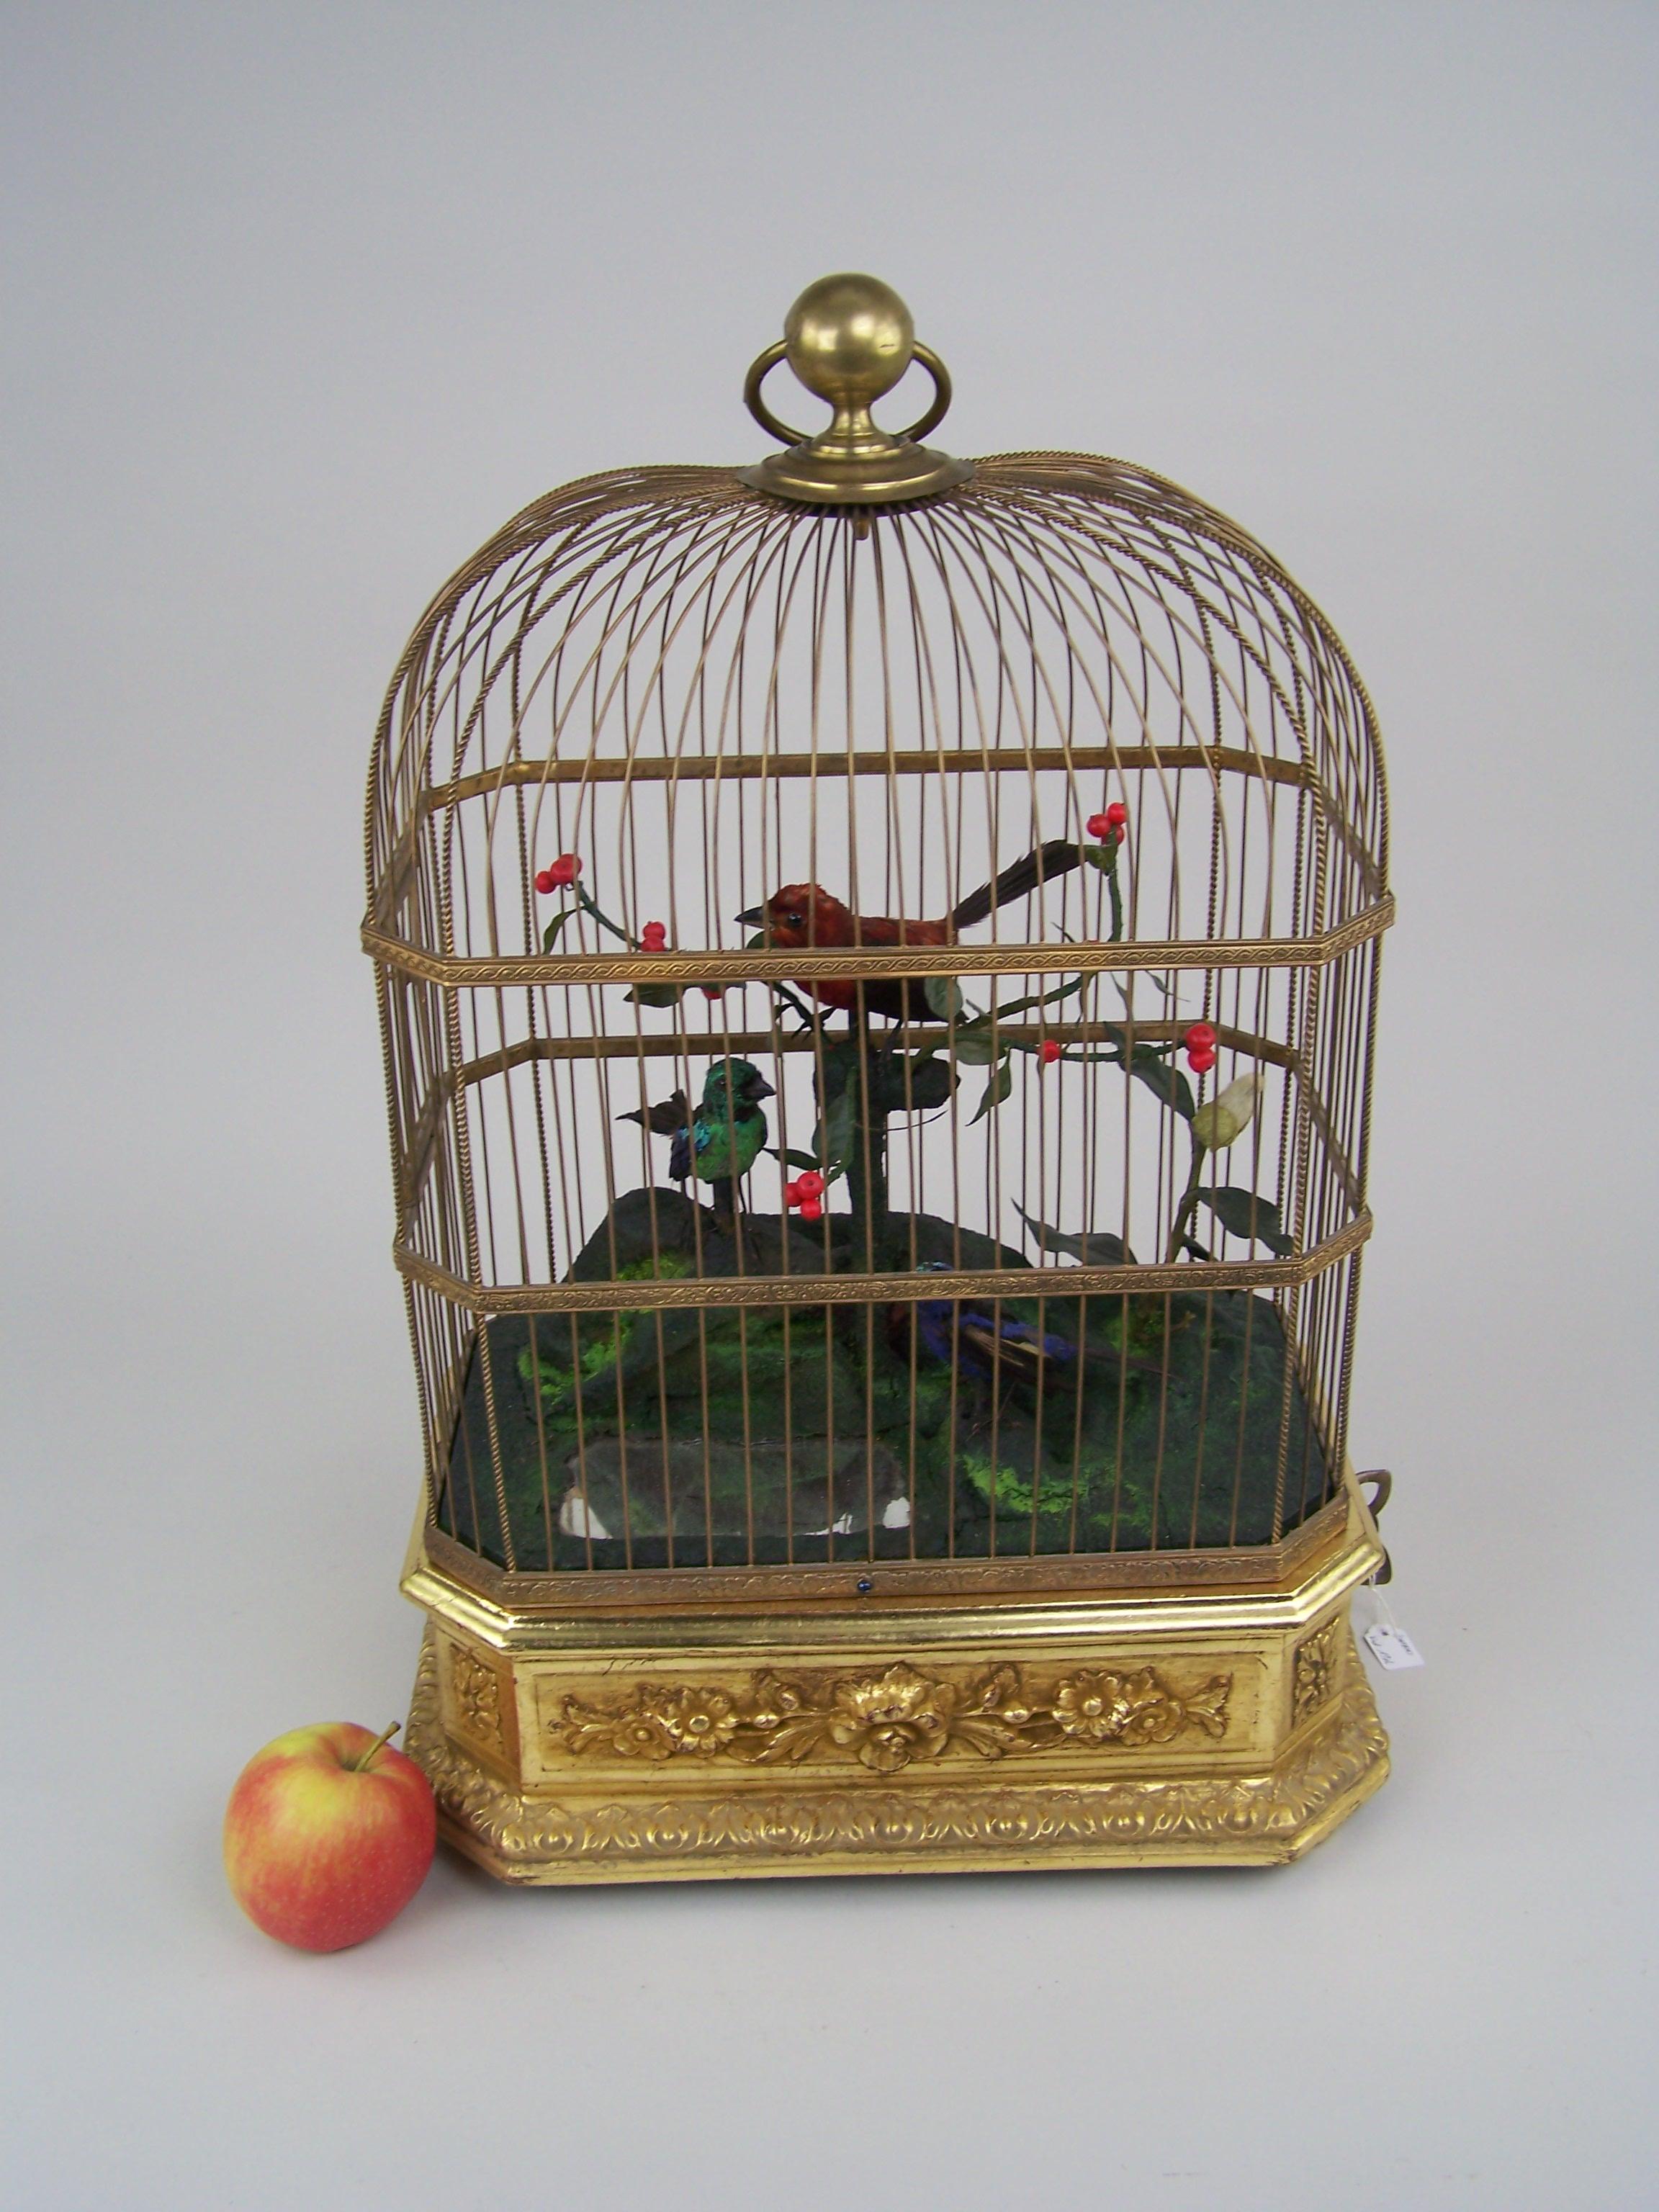 Rare and very decorative singing bird automaton.

Made in de 4th quarter of the 19th century by Bontems in Paris (France).

This top quality singing bird has a wooden gilded base to conseal the mechanism. In the cage there are 3 original birds in a